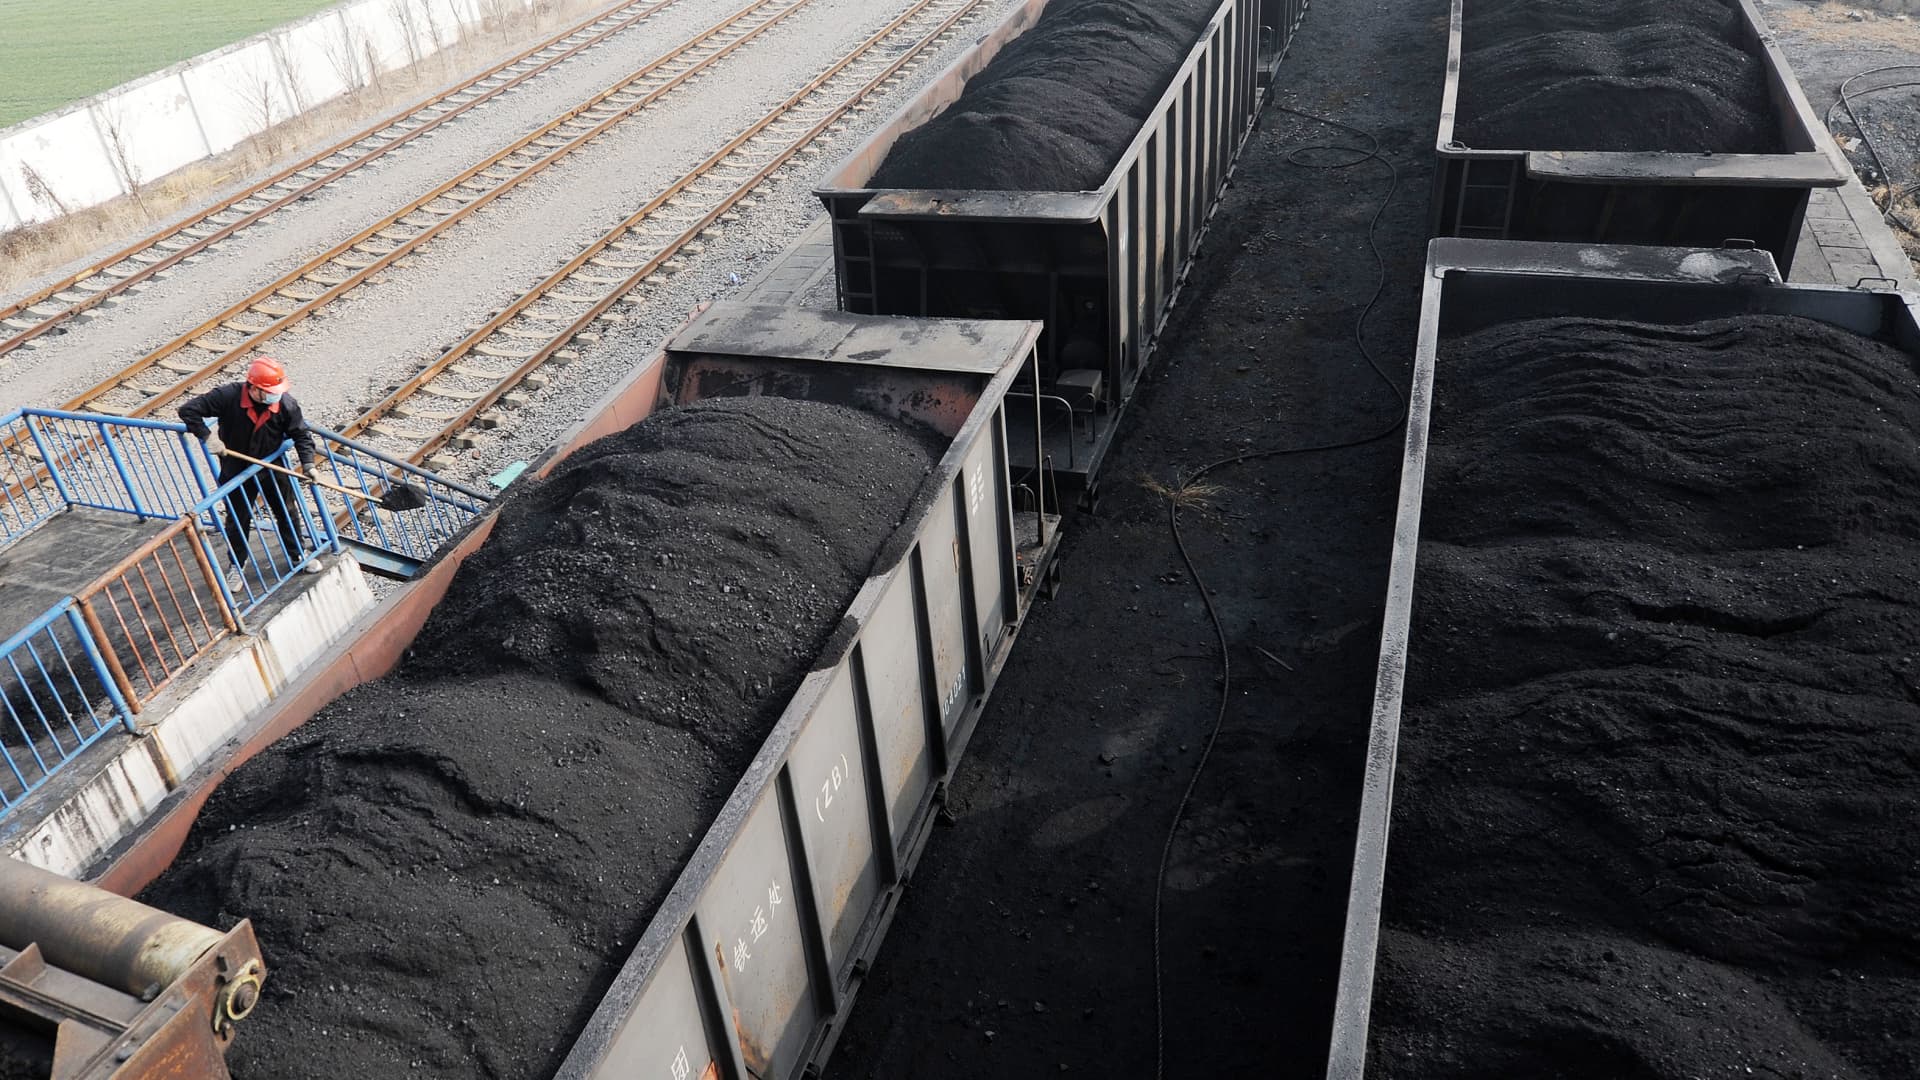 IEA says coal use hit an all-time high last year — and global demand will persist near record levels